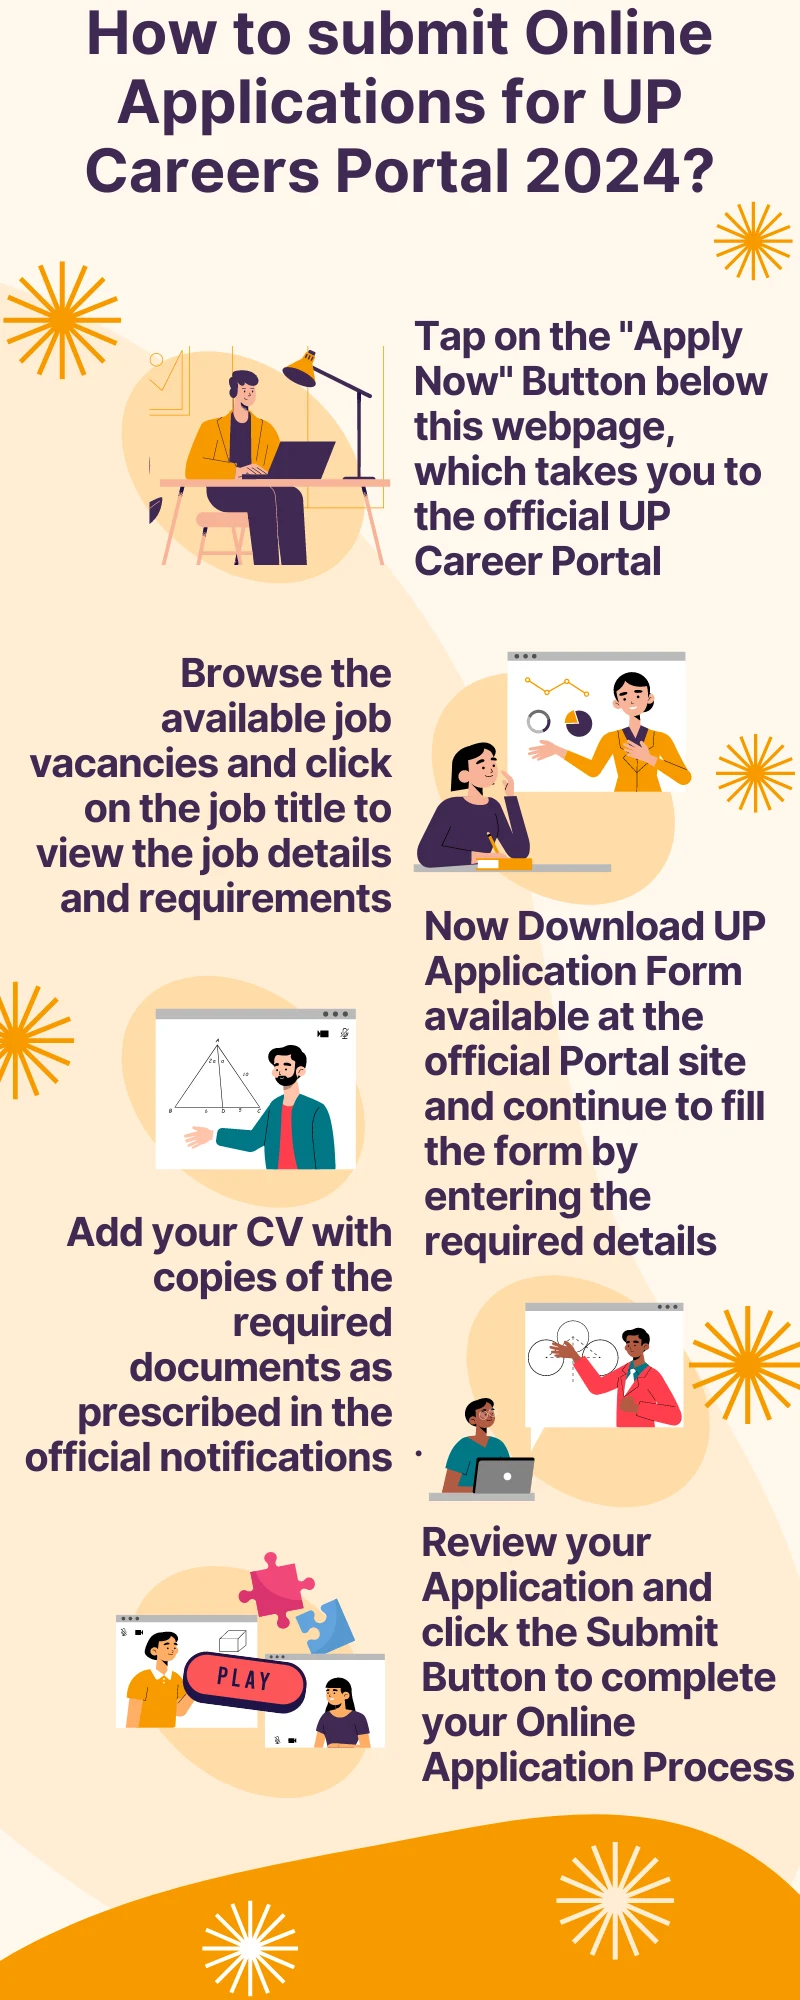 How to submit Online Applications for UP Careers Portal 2024